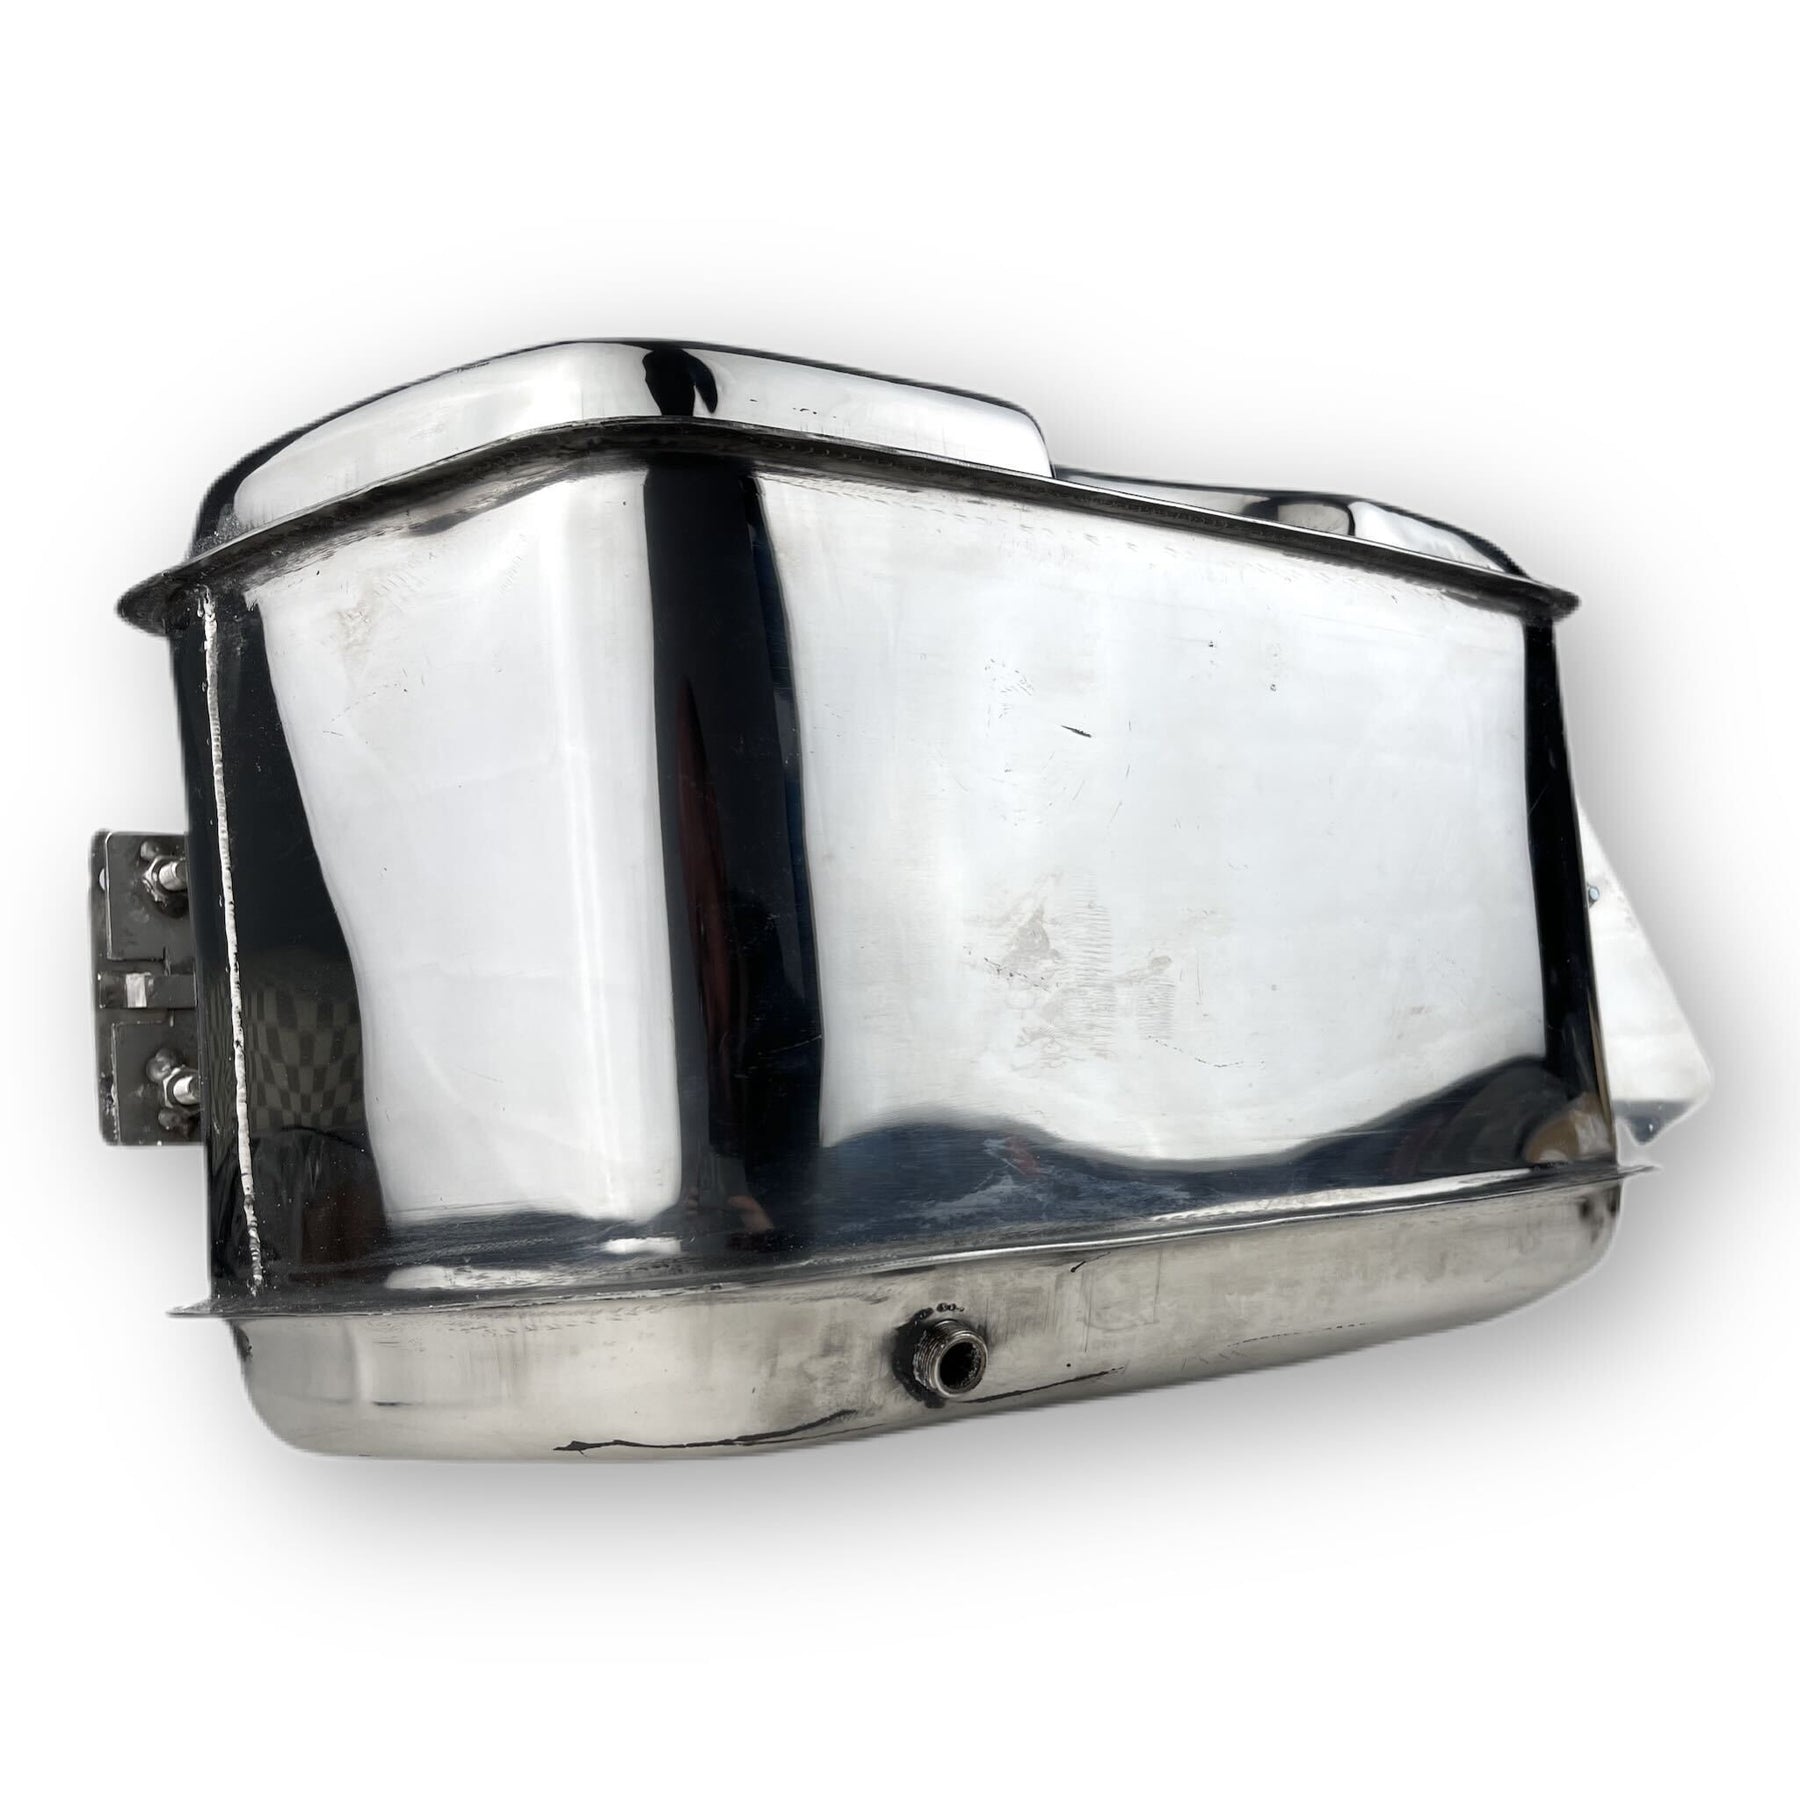 Lambretta TS1 Cut Out Long Range 17 litre petrol tank with built-in toolbox - Polished Stainless Steel